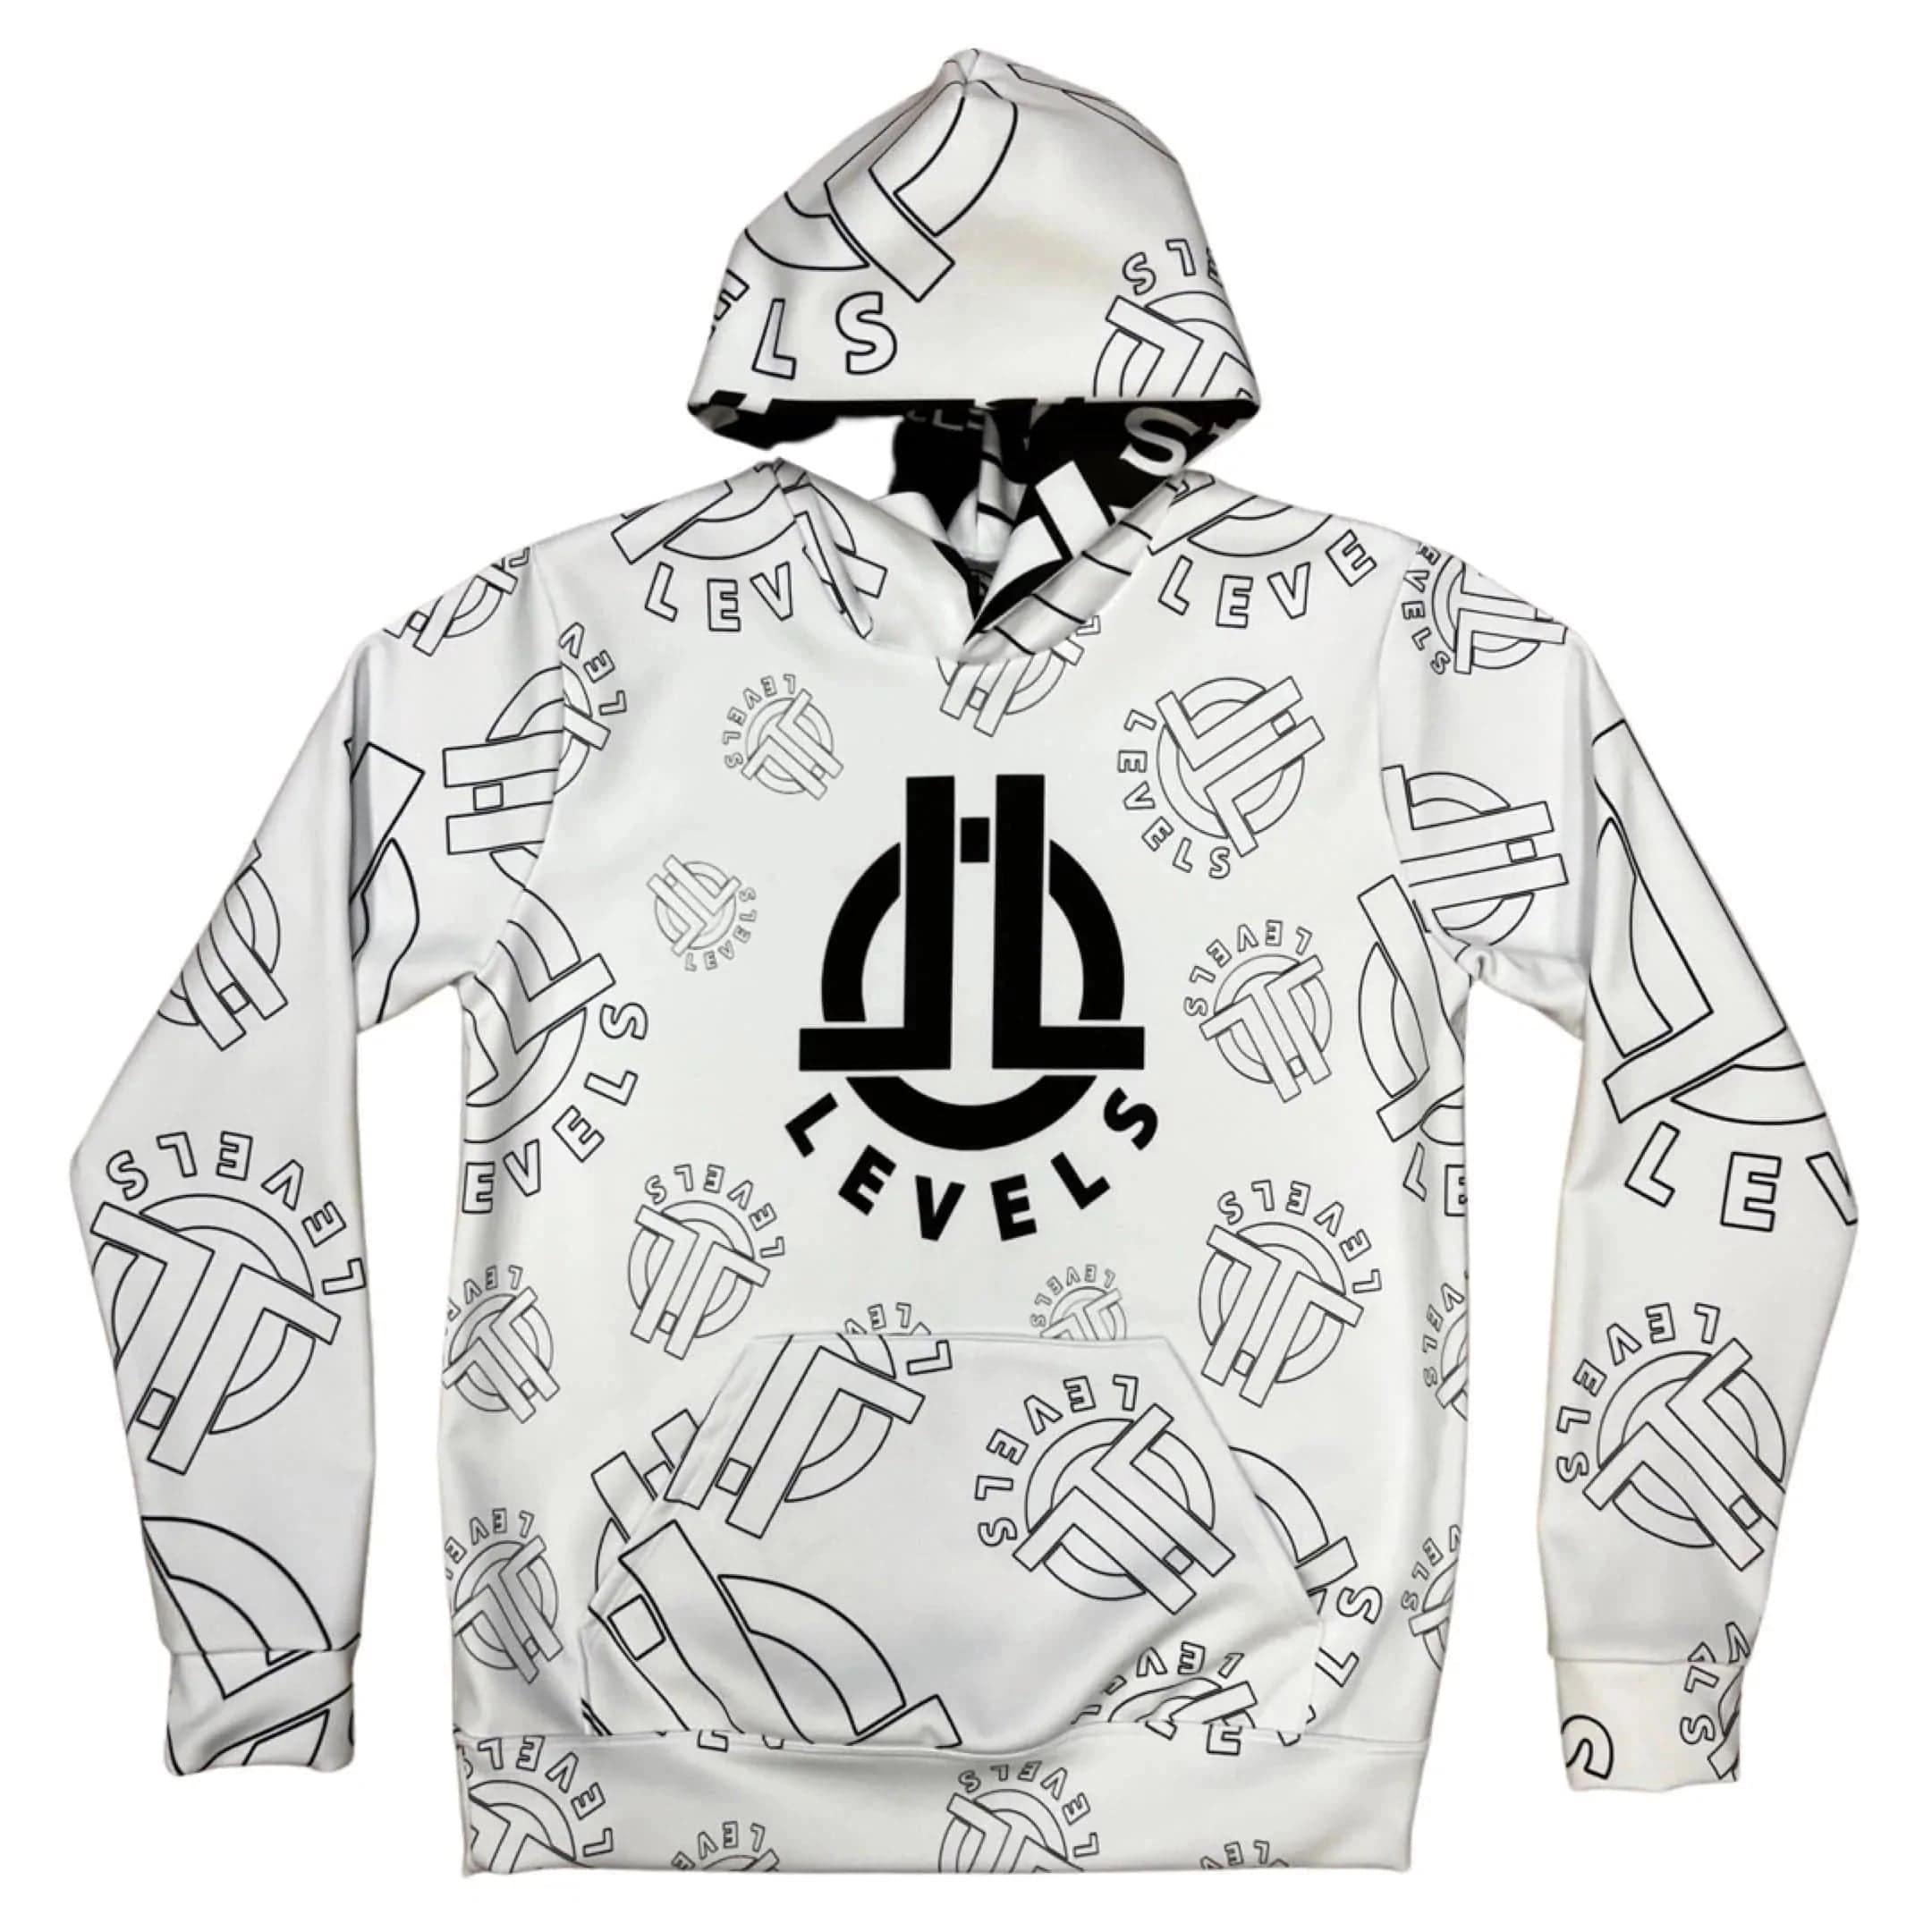 LEVELS, LLC Hoodie DYE SUBLIMATION HOODIE (BLACK/WHITE) 2ND EDITION